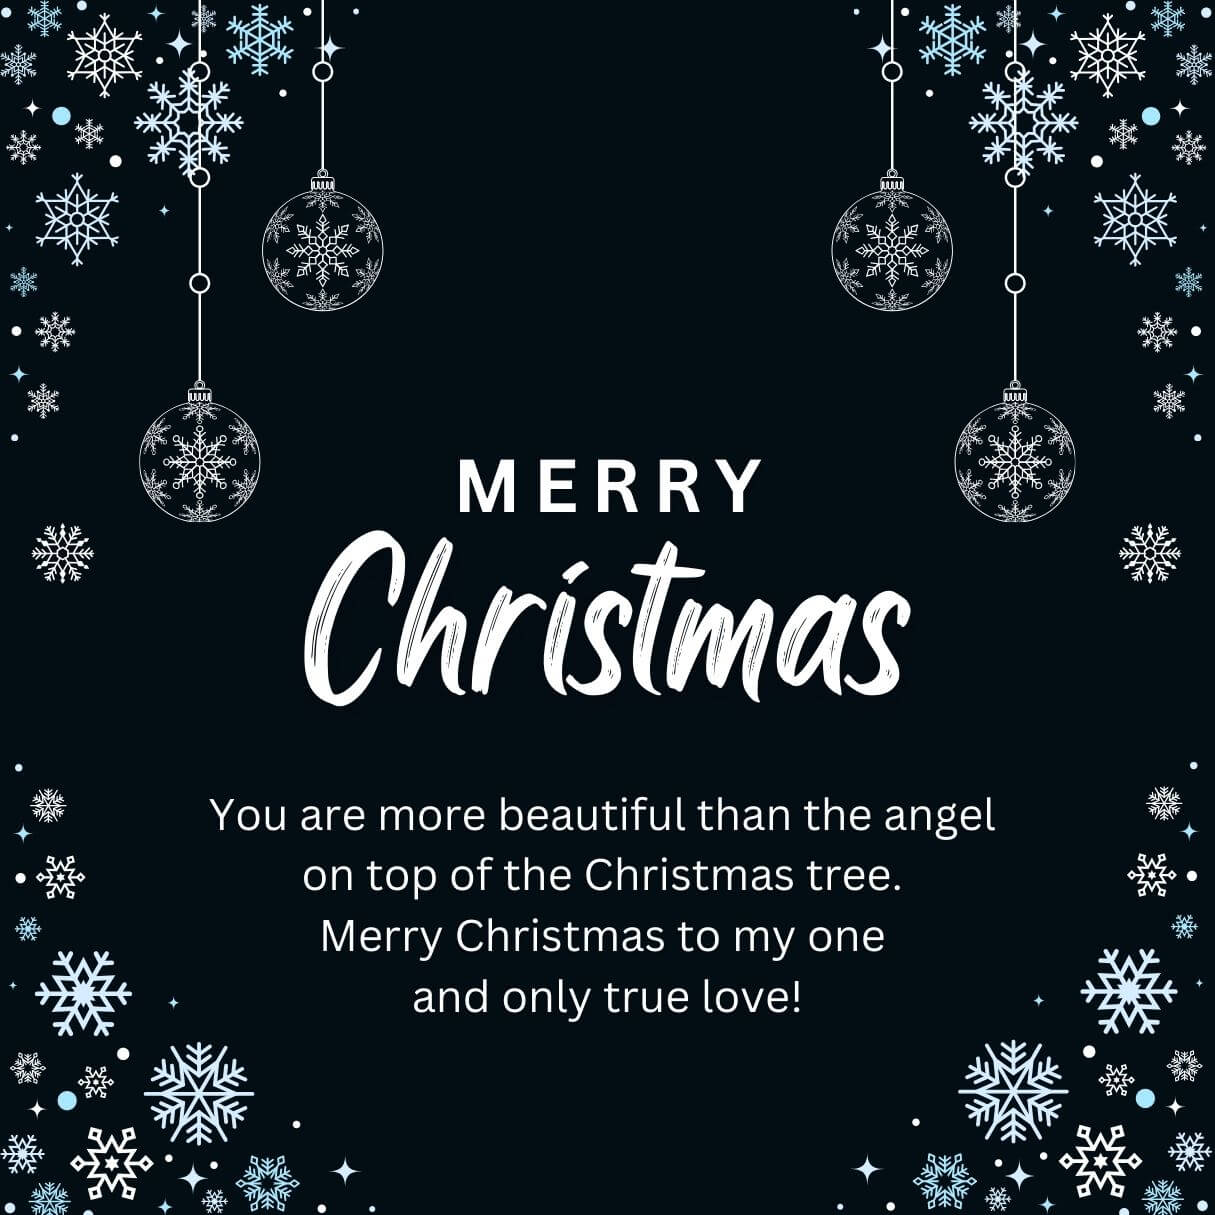 Merry Christmas Wishes For Lovely Girlfriend